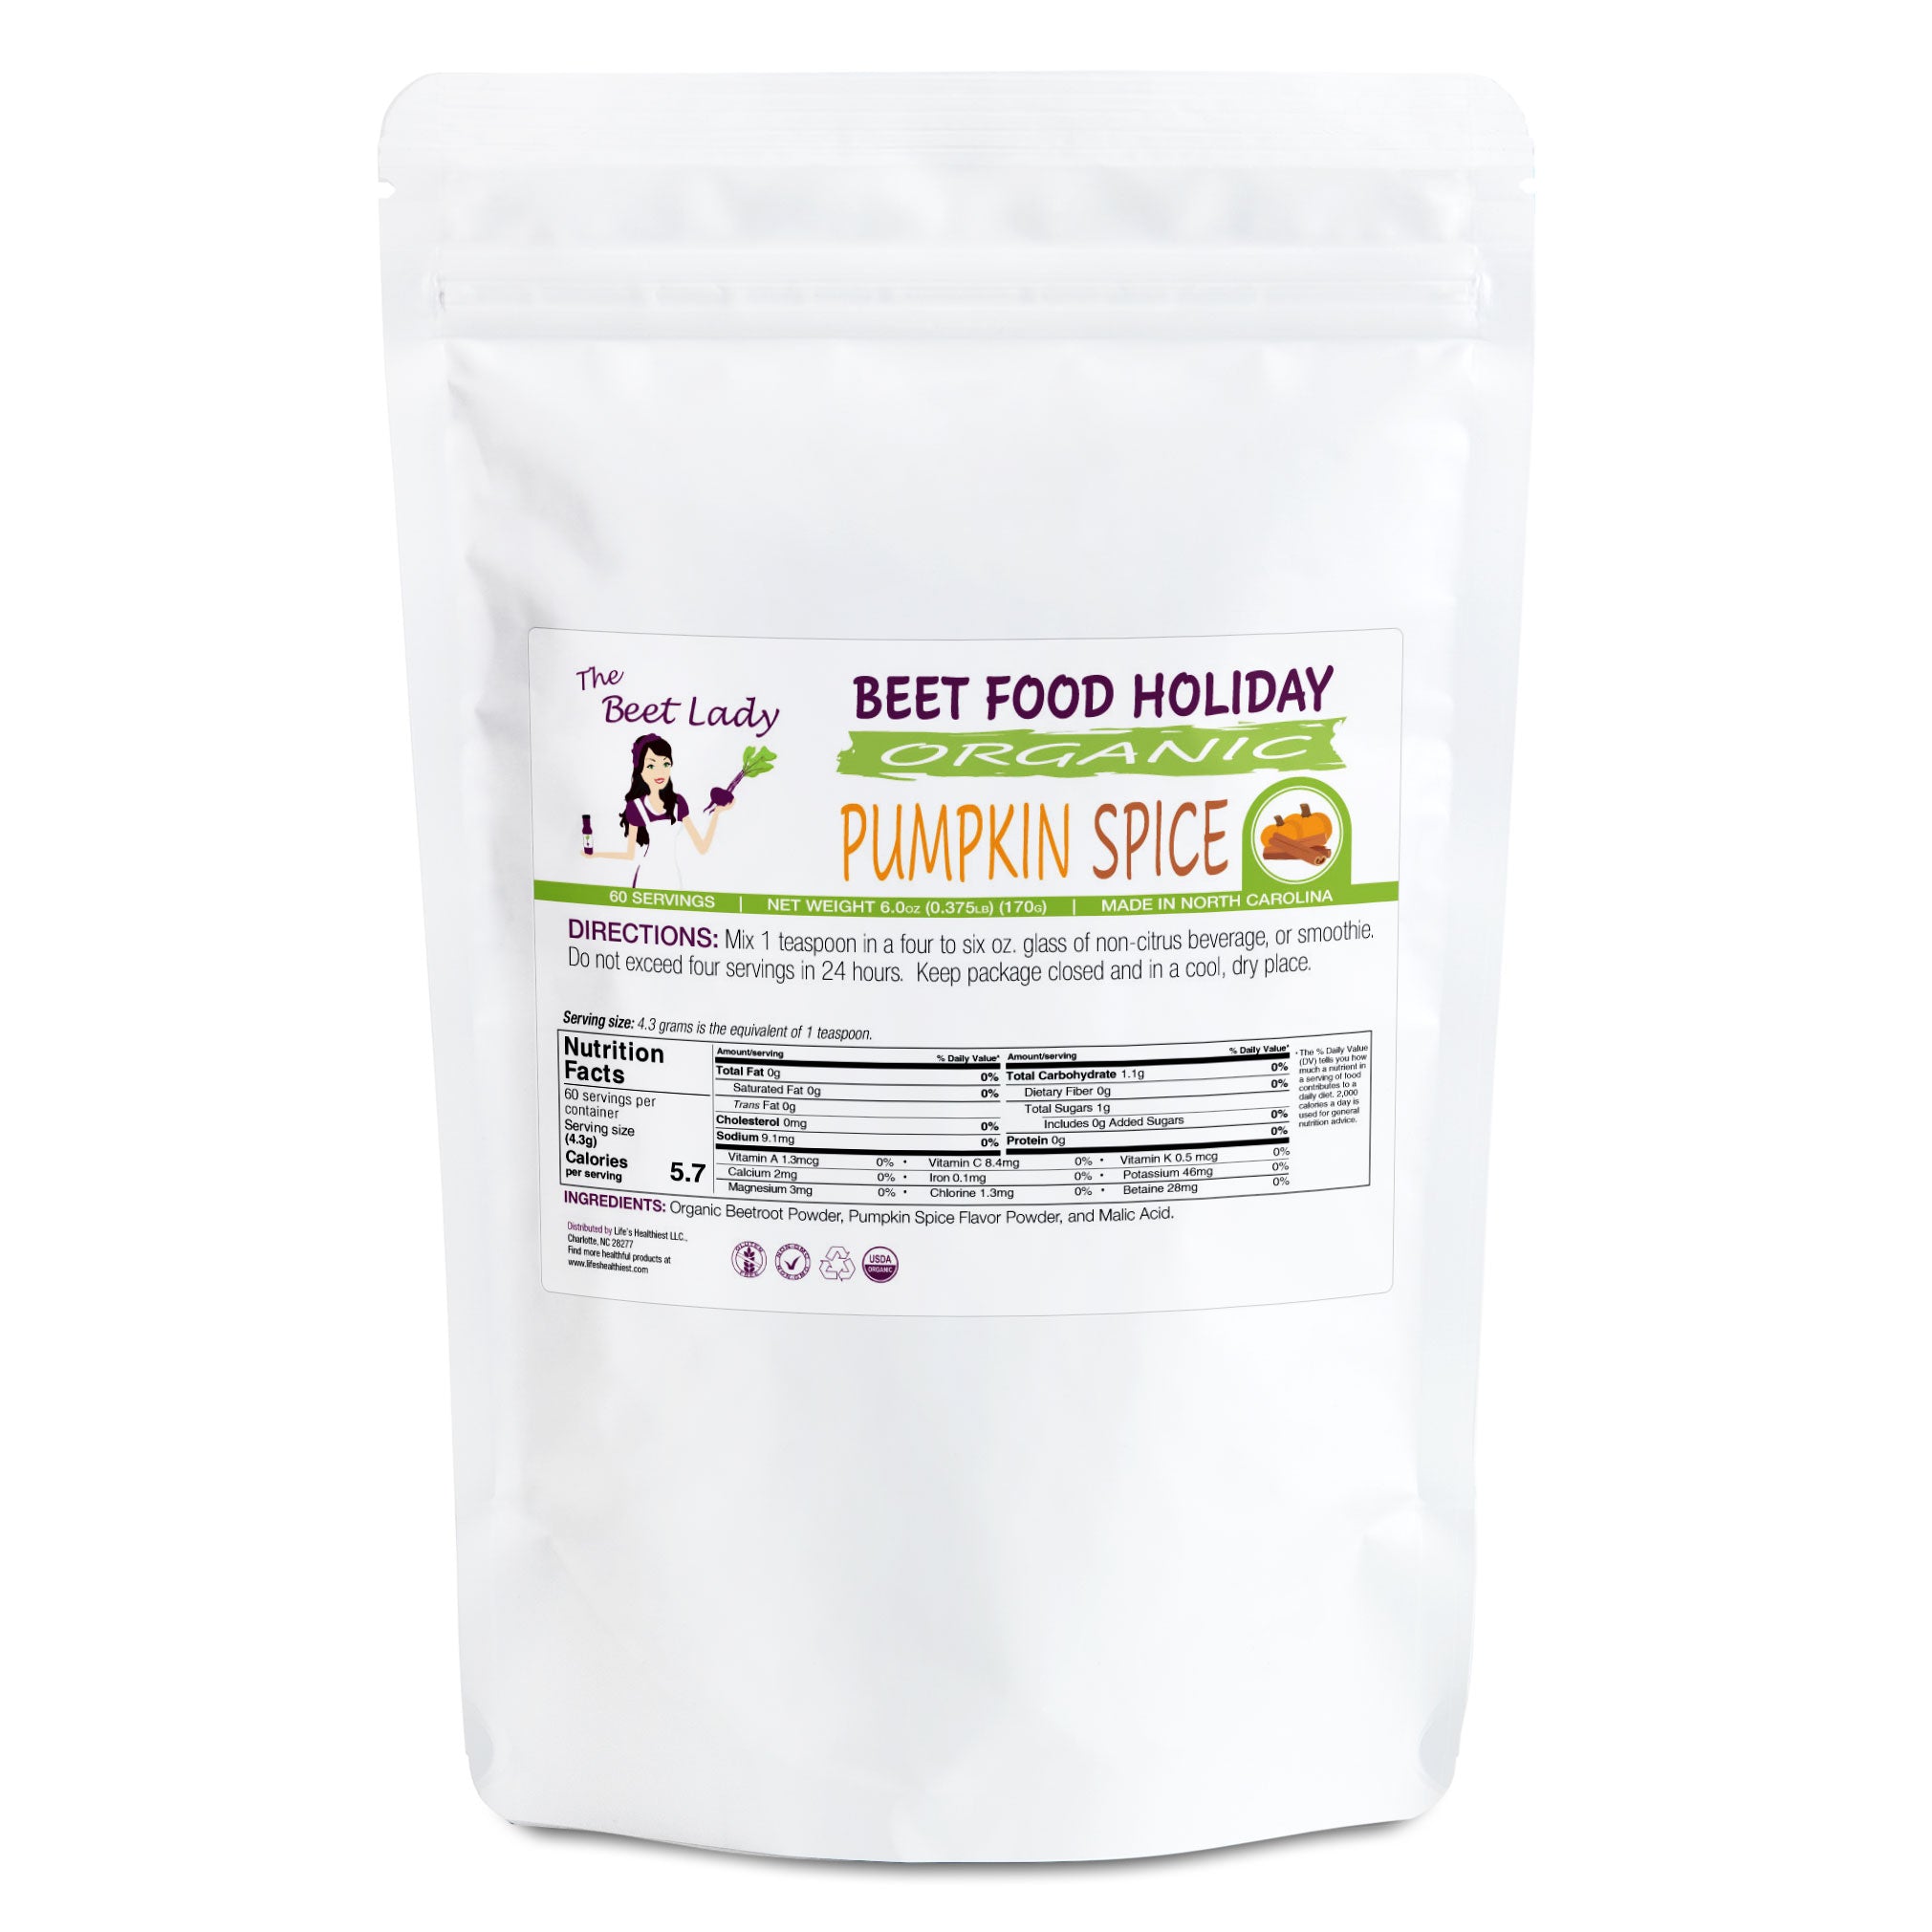 The Beet Lady HOLIDAY PUMPKIN SPICE Beet Food Nutritional Therapy powder blend.  Organic, plant-based, non-GMO.  6 oz - 0